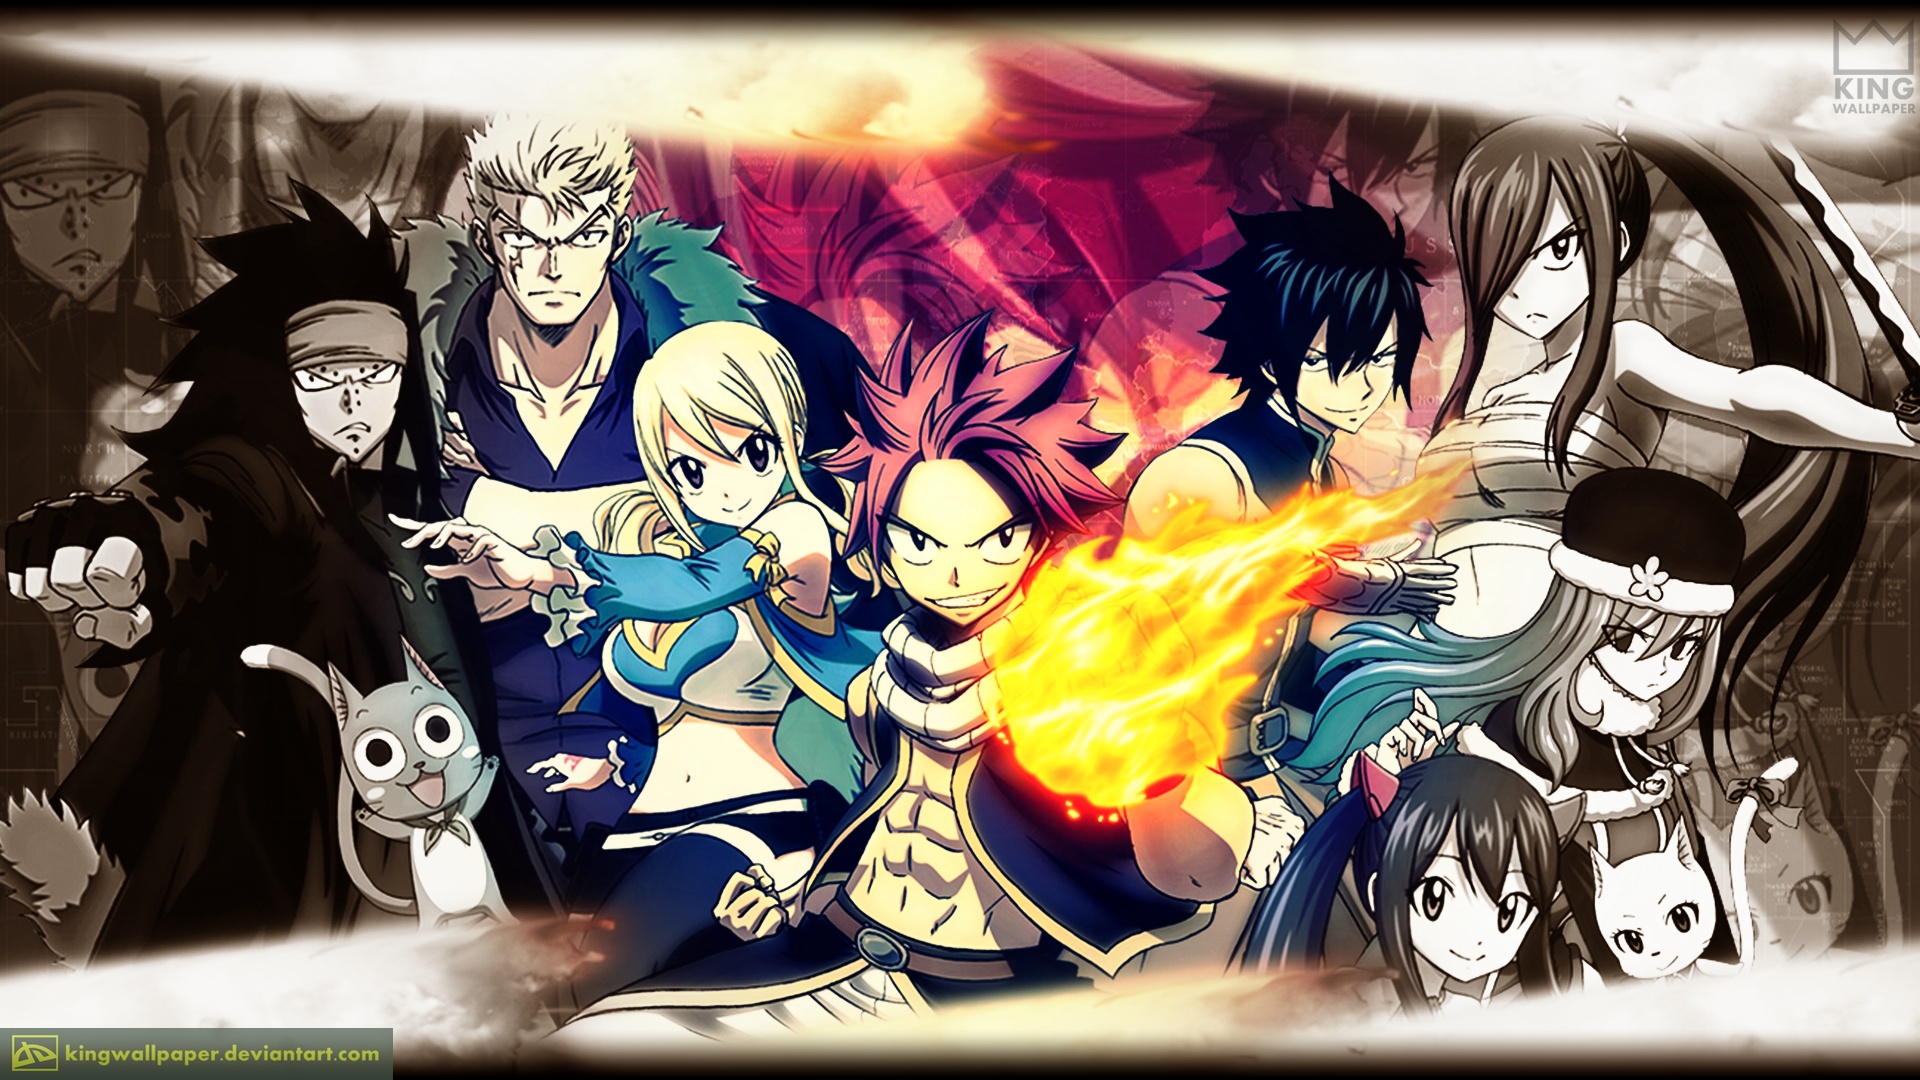 Fairy Tail Wallpaper Hd Free Download